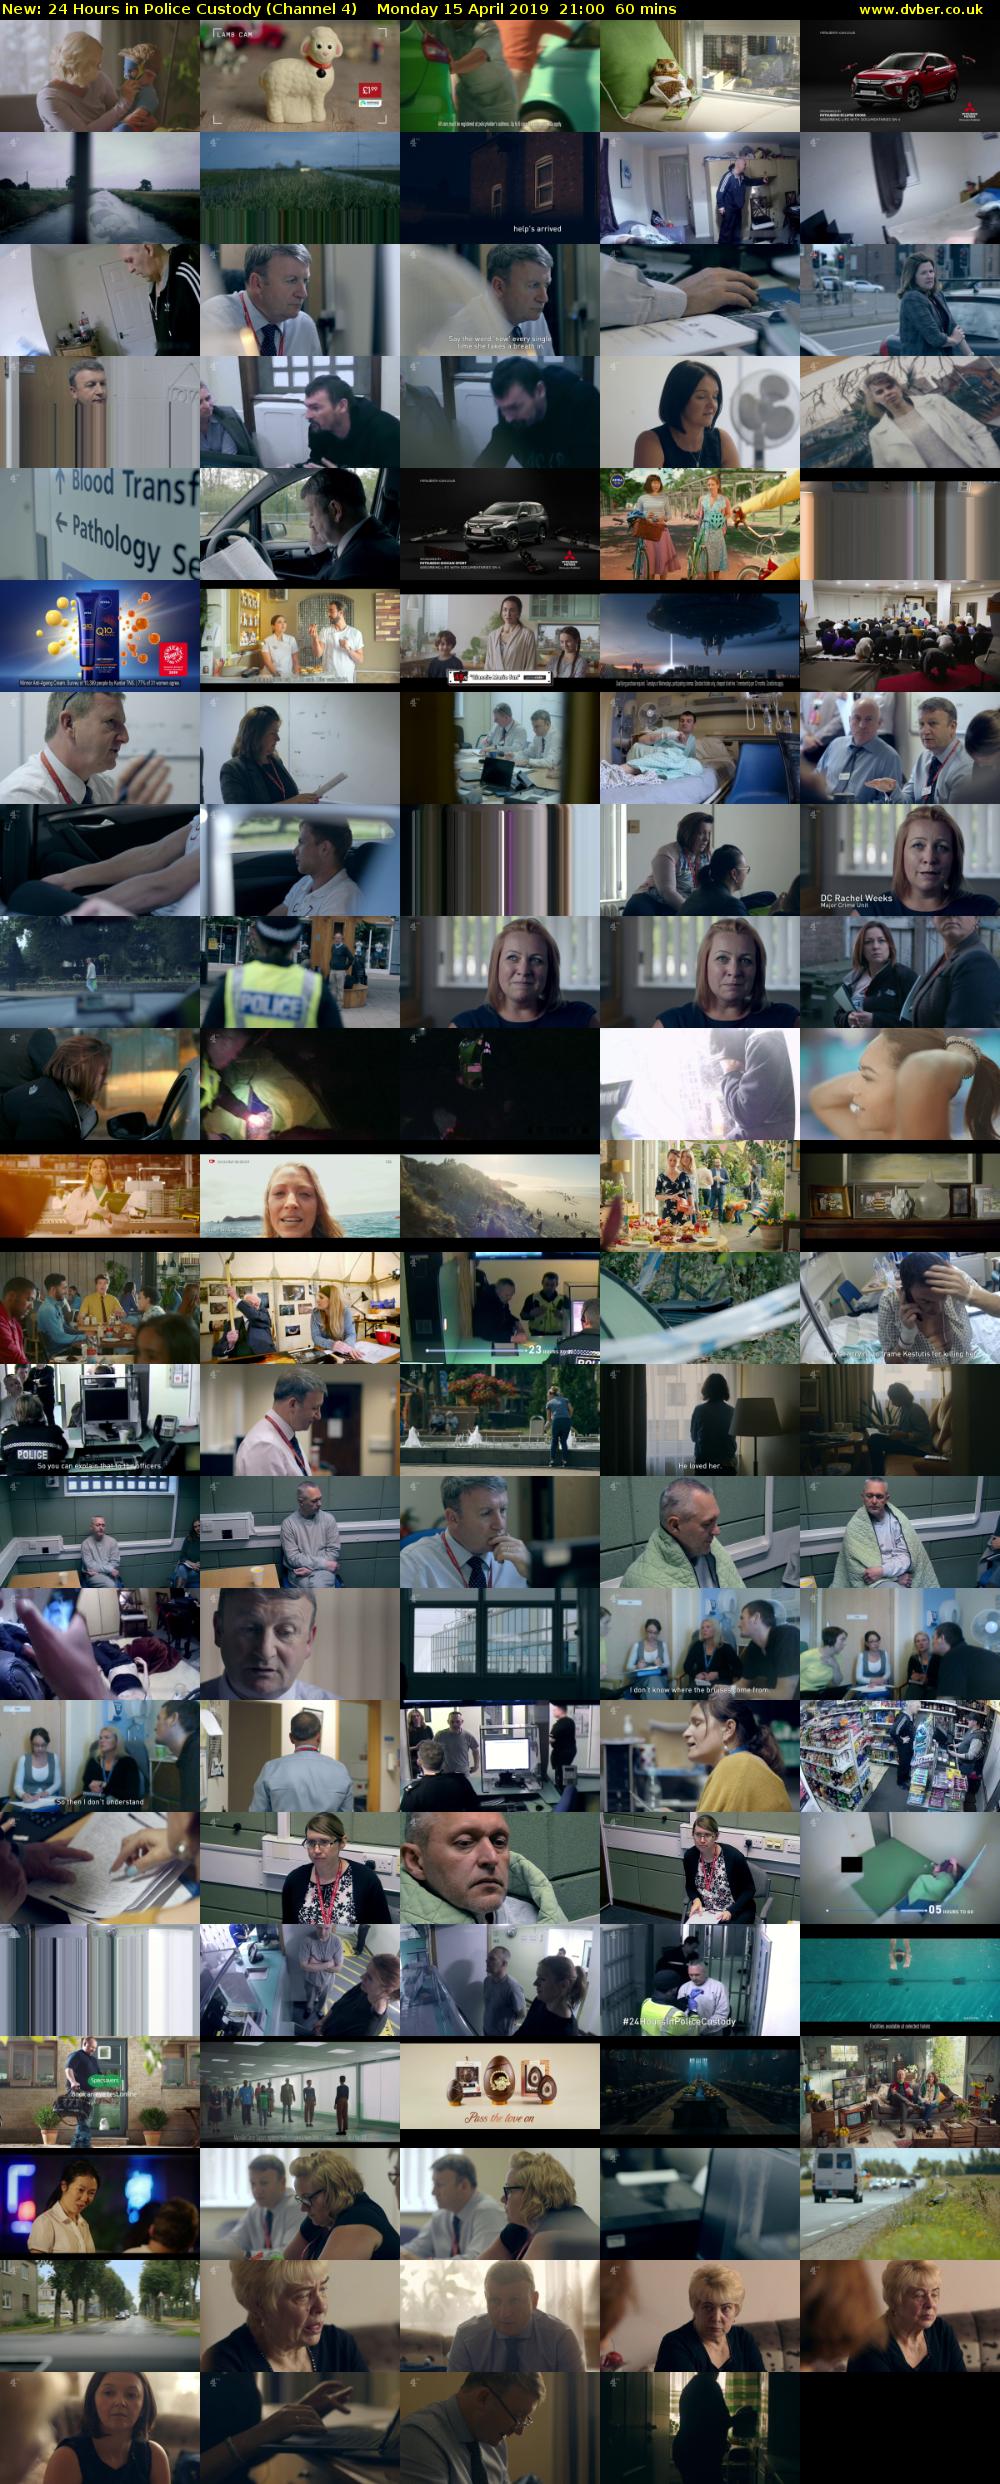 24 Hours in Police Custody (Channel 4) Monday 15 April 2019 21:00 - 22:00